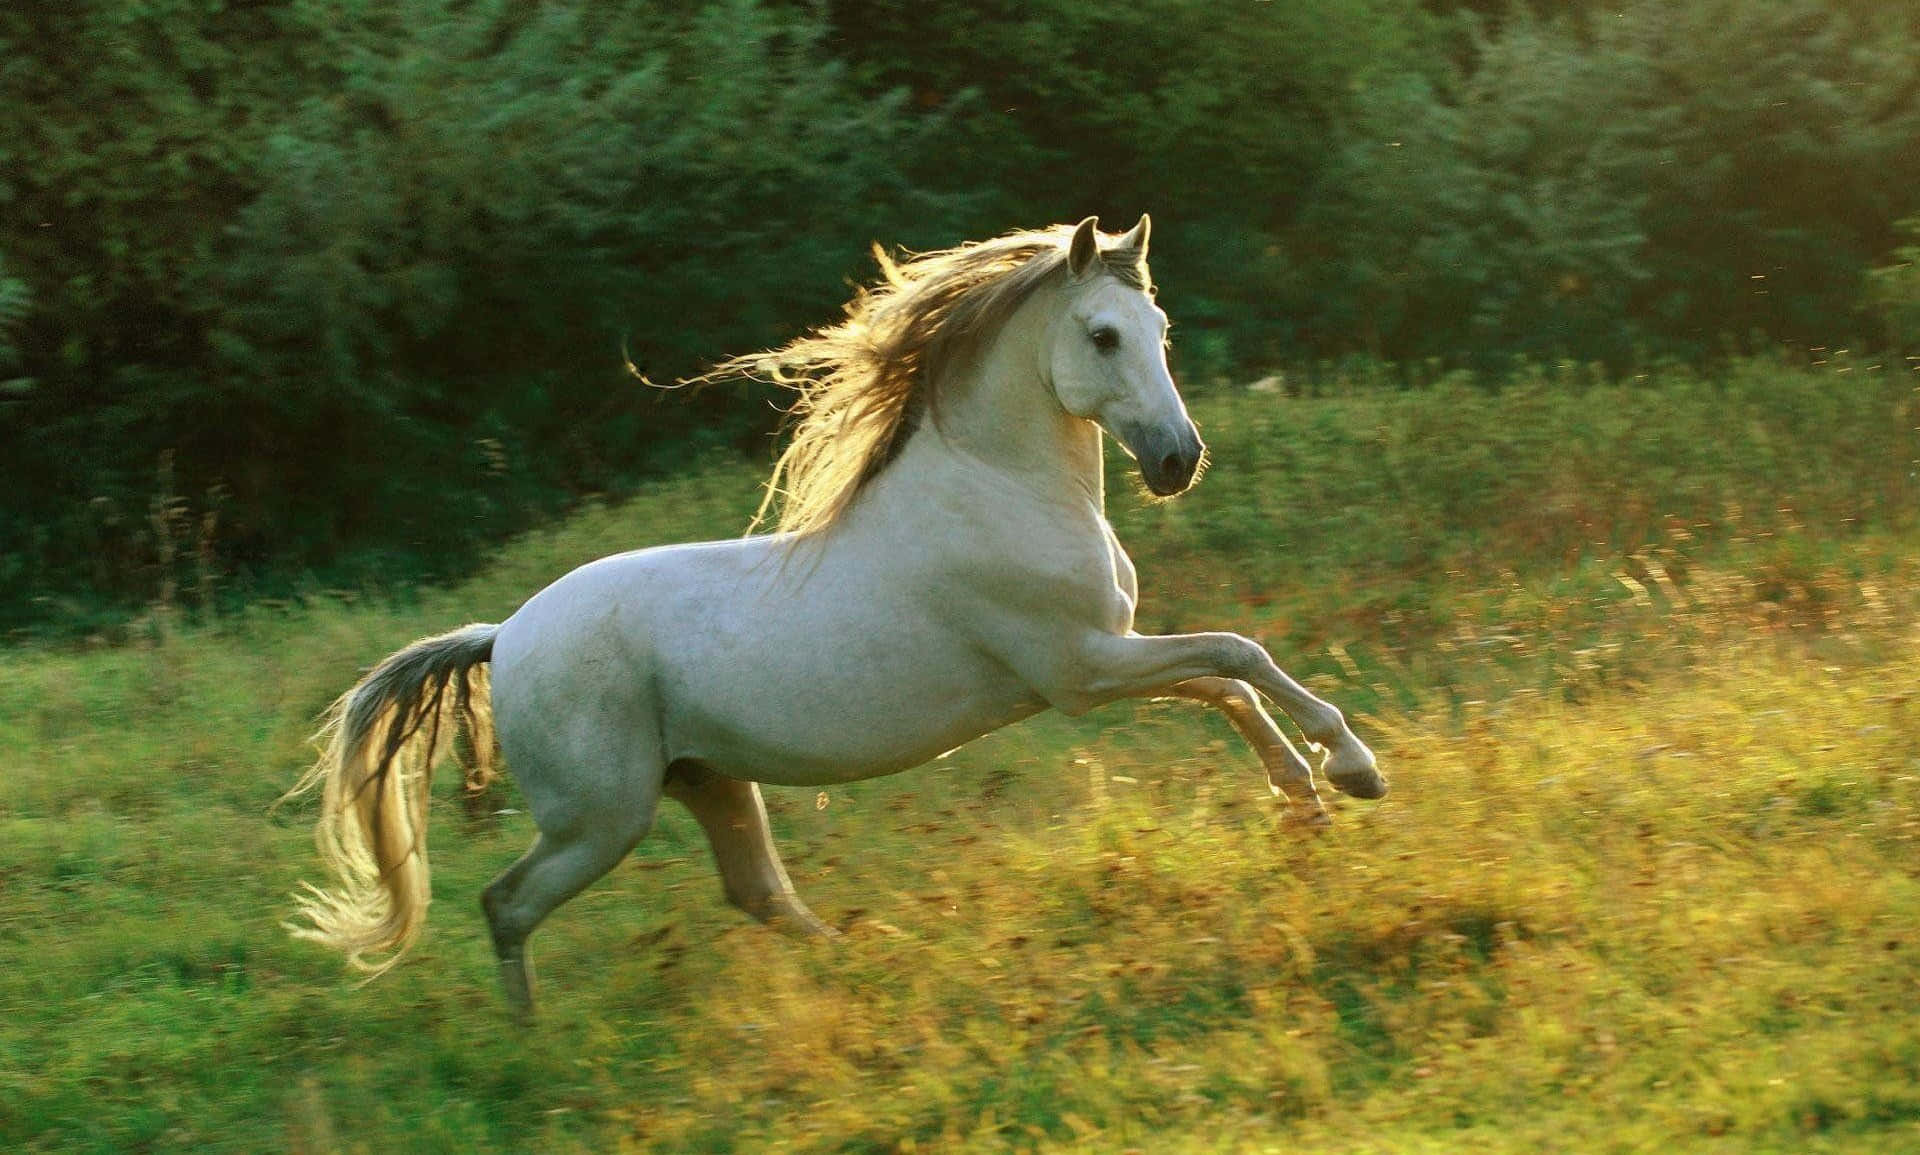 Majestic White Horse Galloping In The Wilderness